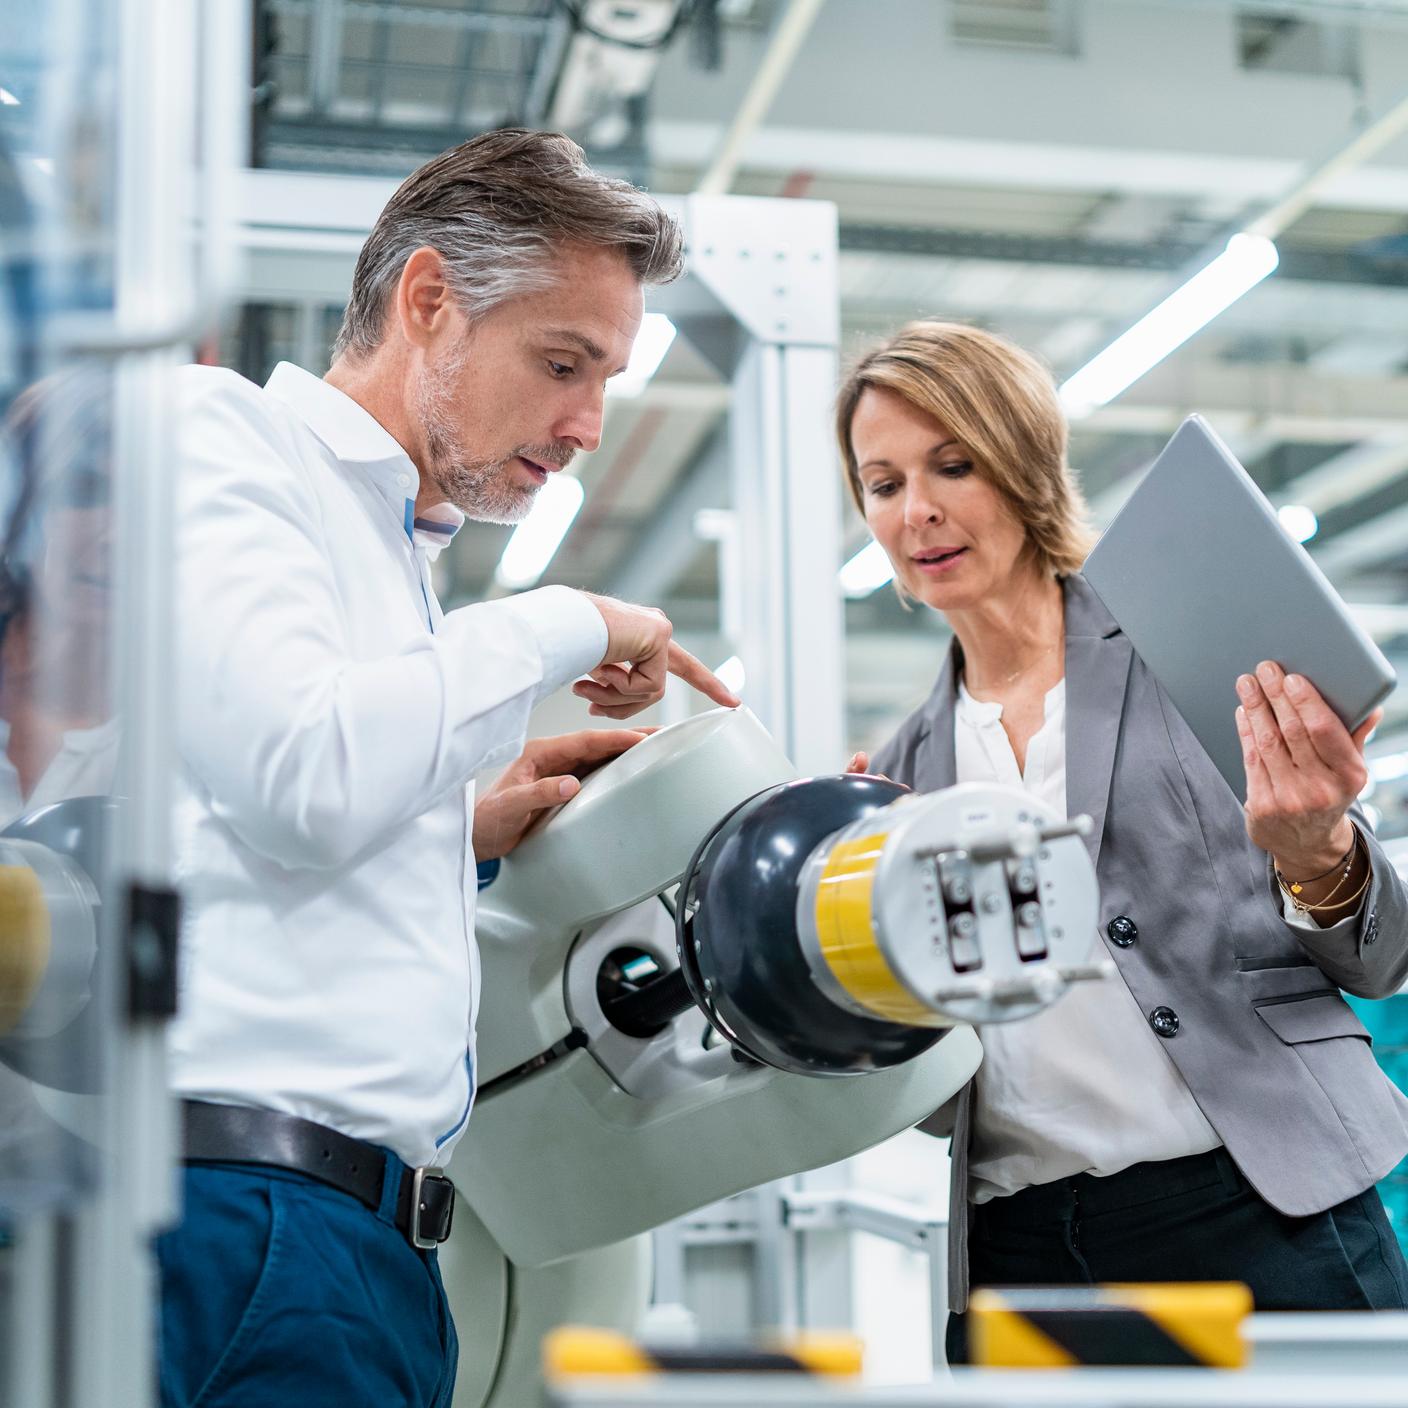 Businesswoman and man talking at assembly robot in a factory